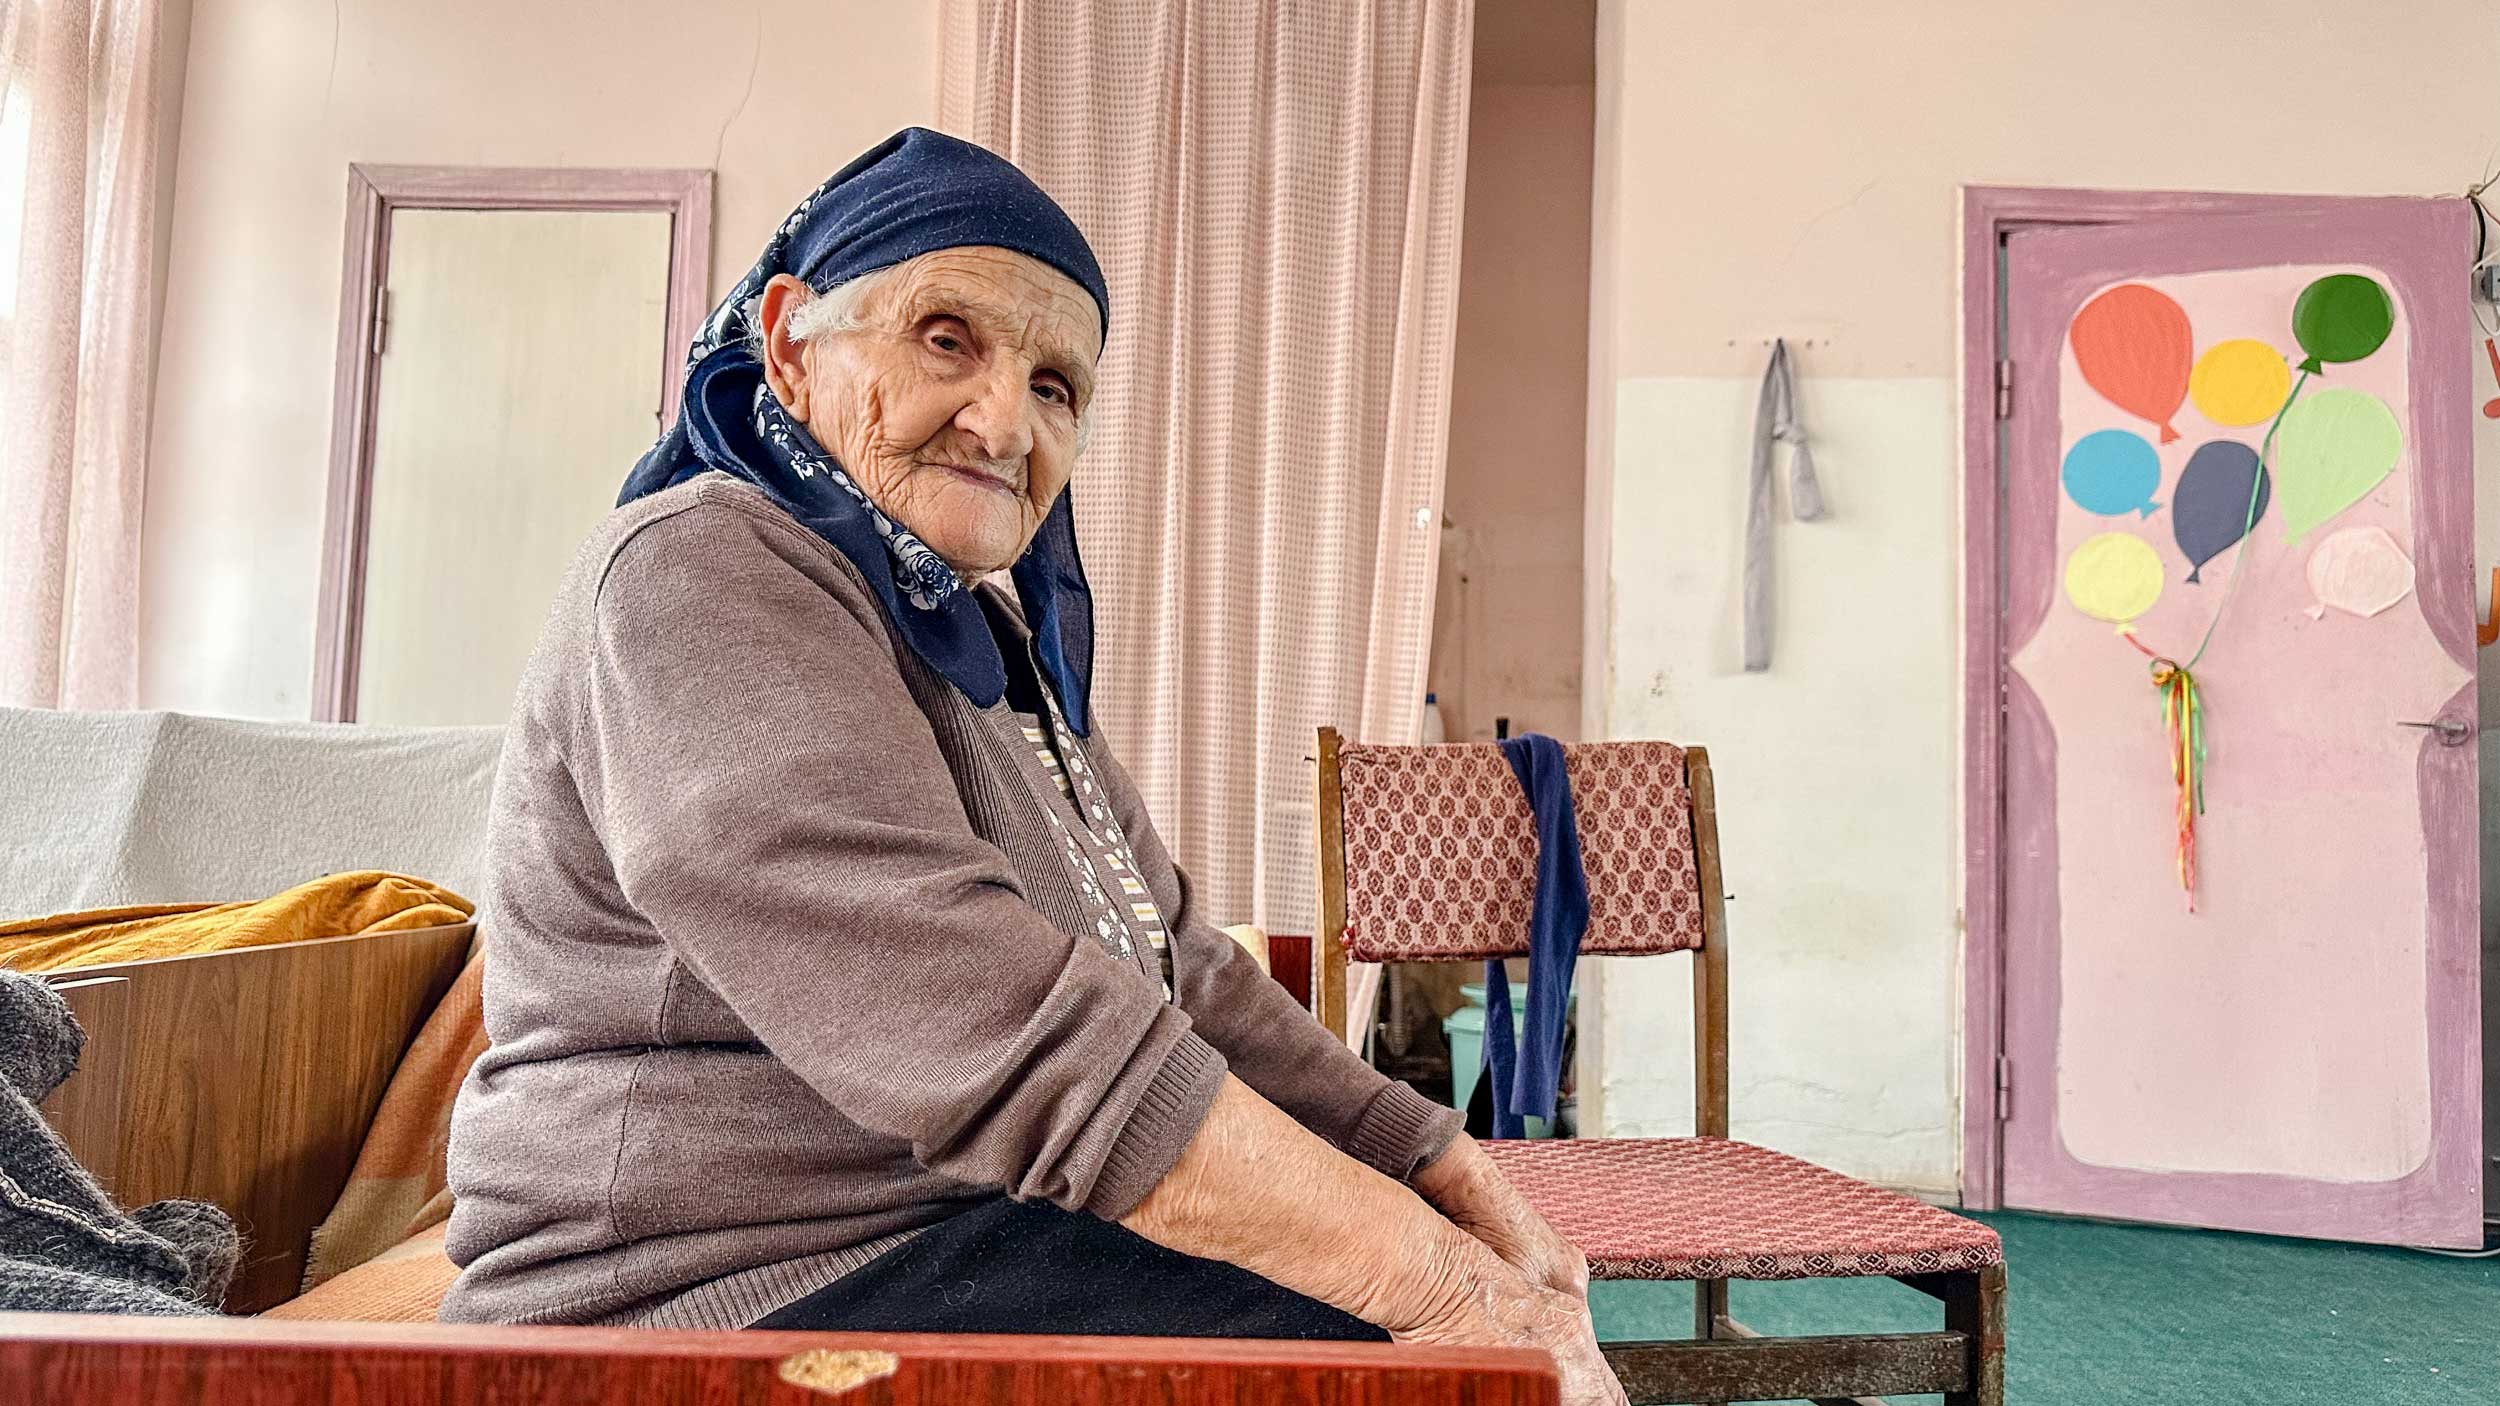 The journey to Armenia was particularly hard for old people like Julieta Shahbazyan, who, at 86, left her native village of Aygestan for the first time. She is living in the kindergarten with 23 members of her family. © Siranush Sargsyan